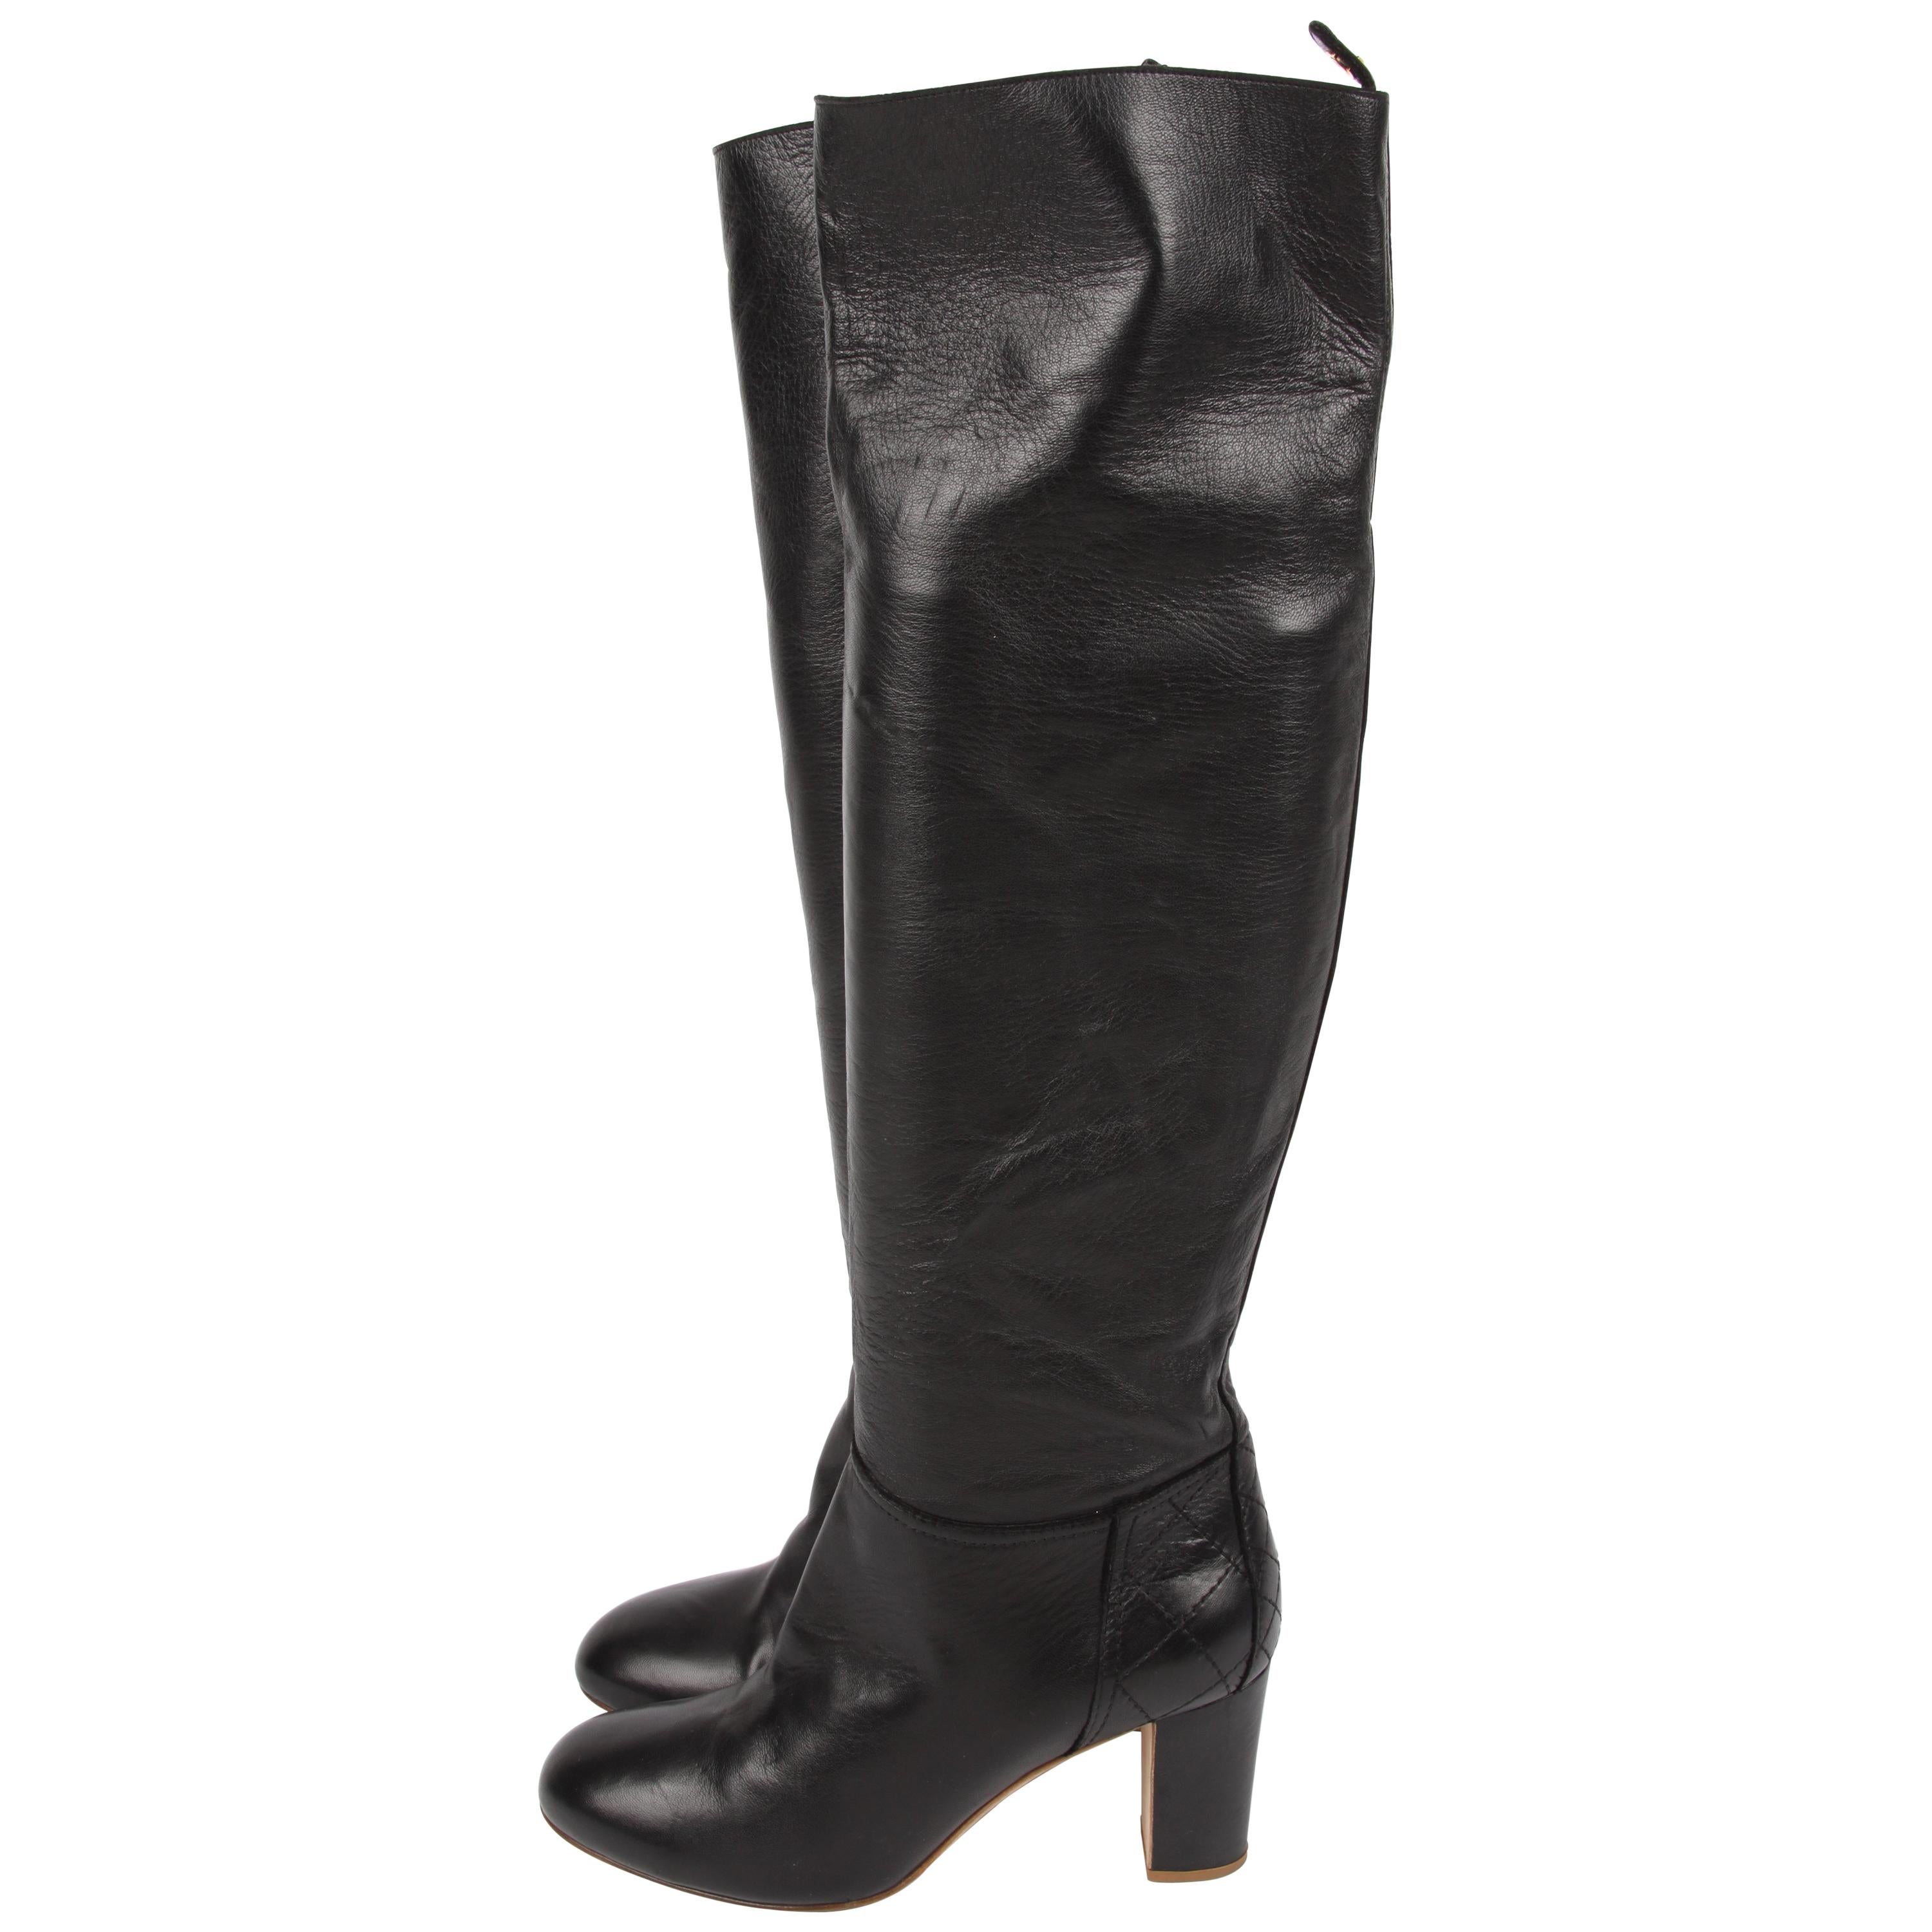 Chanel Knee High Boots - black leather